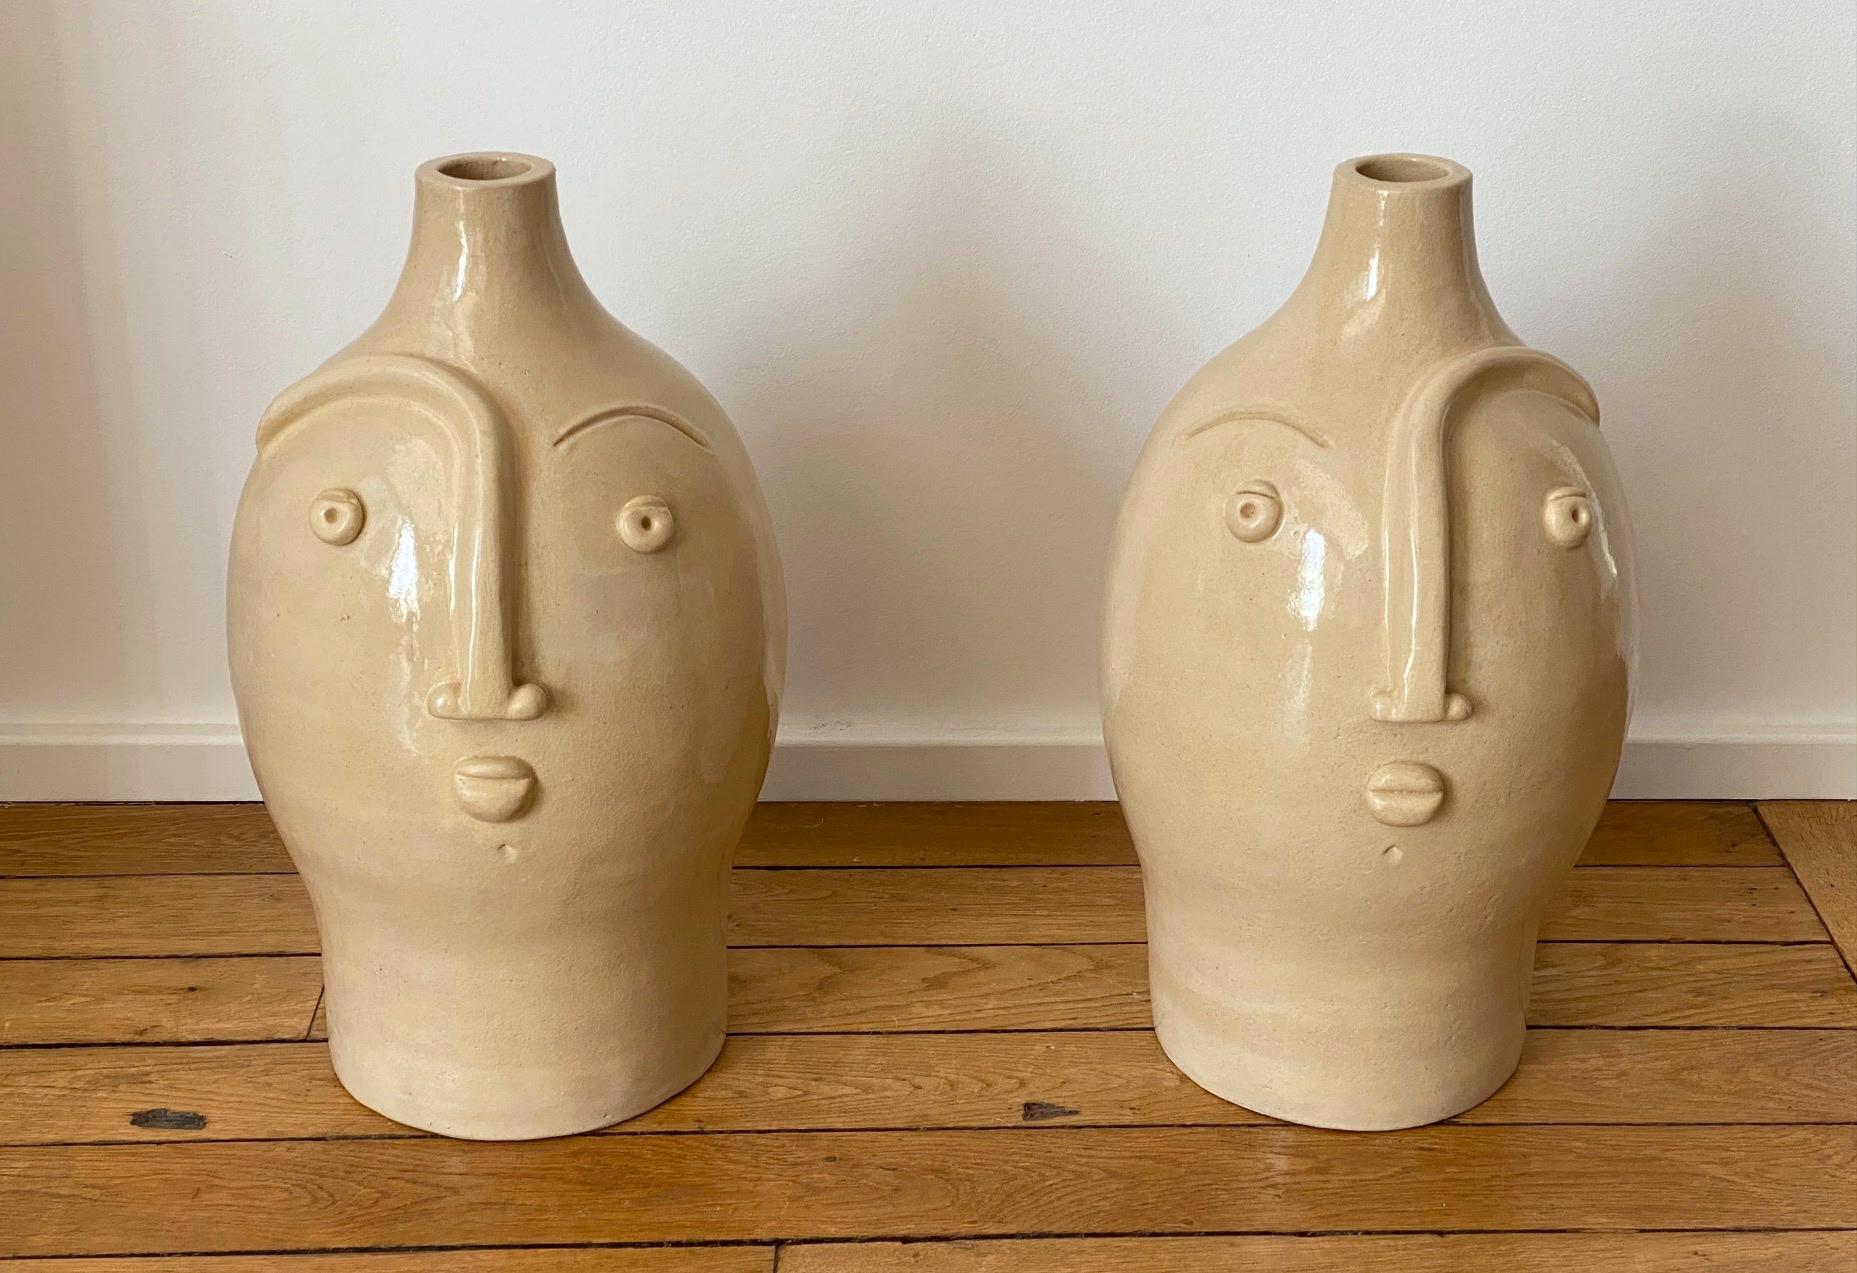 Hand-sculpted ceramic lamp bases or sculptures with stylized faces, stoneware with shiny beige enamel 
One of a kind handmade pieces signed by the French ceramicists Dalo, 2021
The height dimension is for the ceramic sculpture solely (H 47